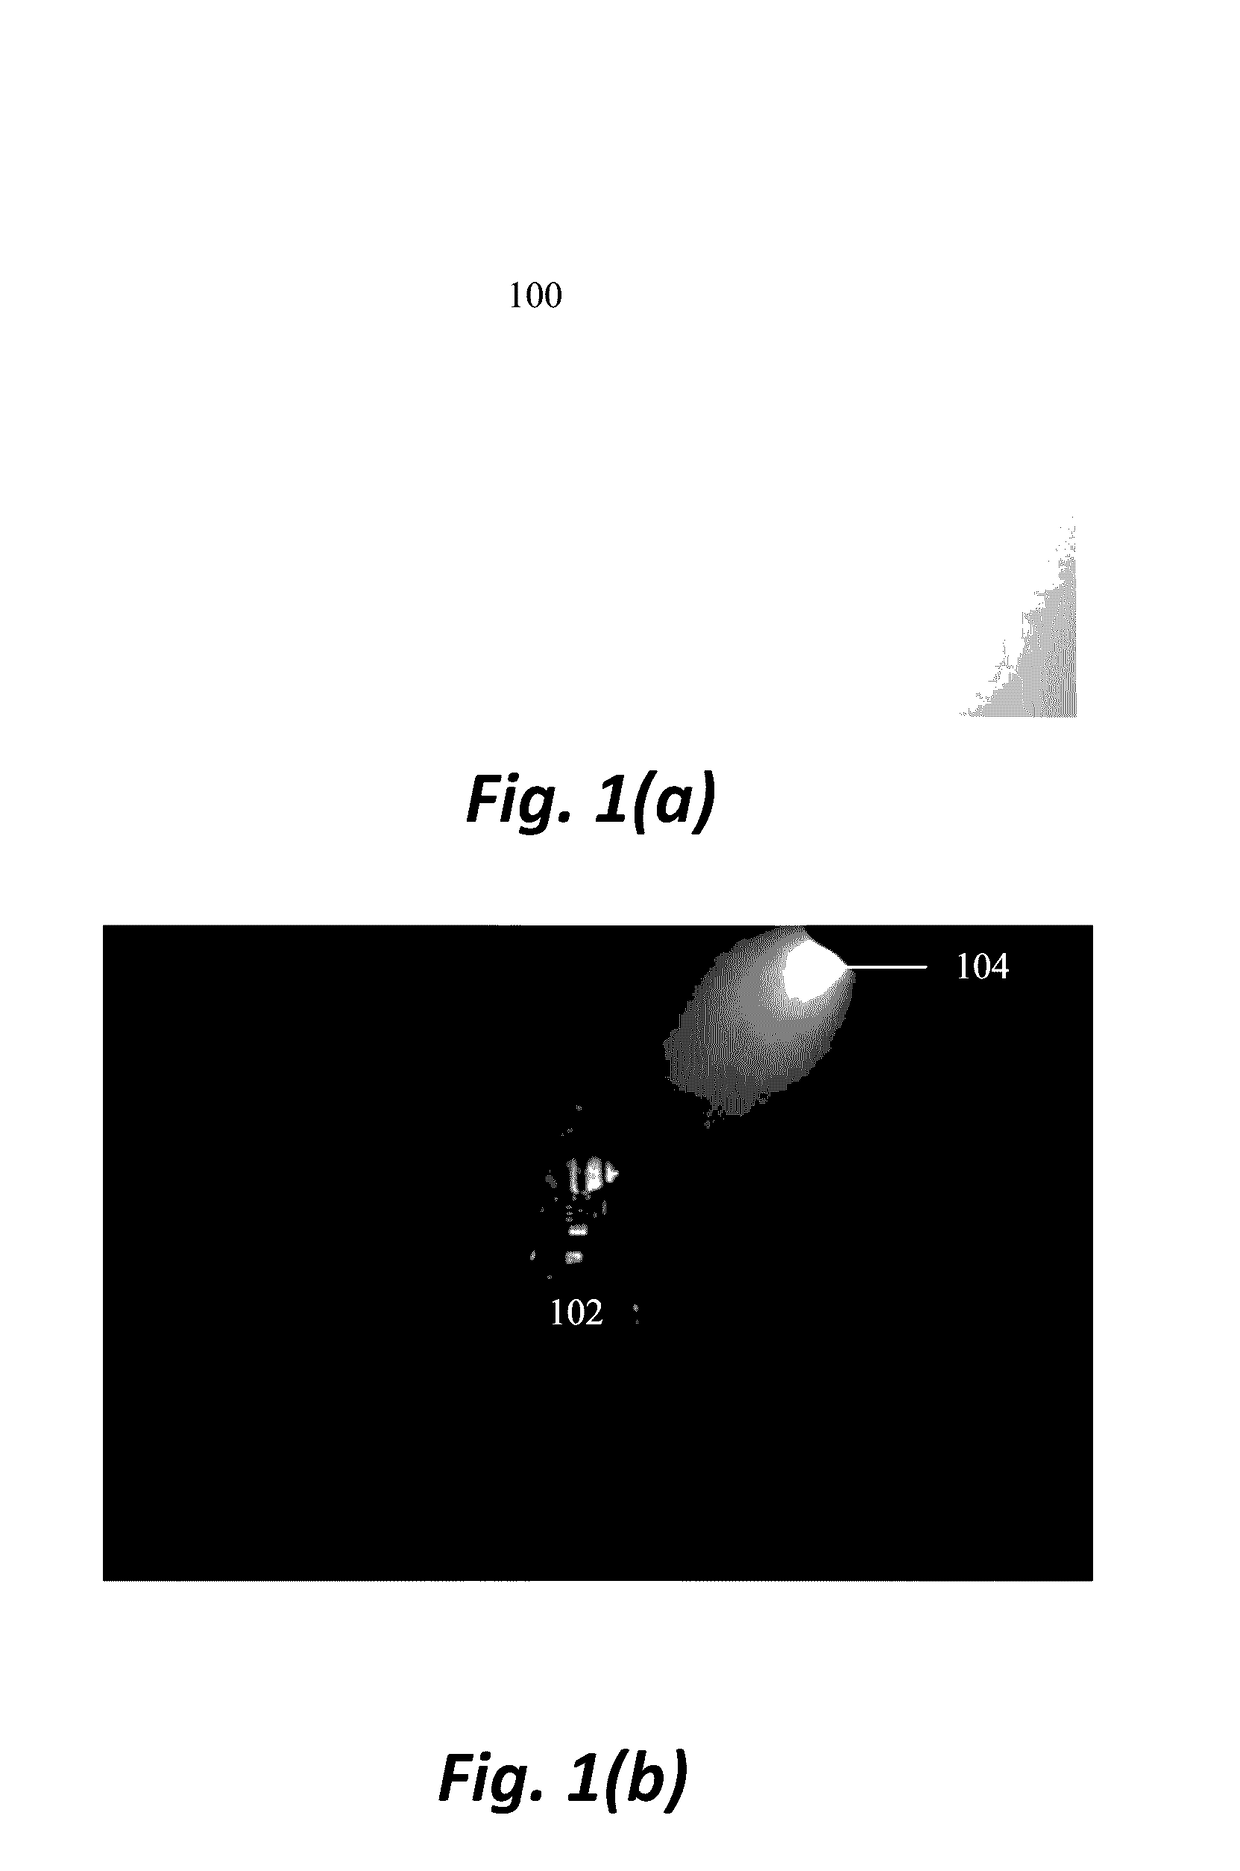 Glare suppression through fog by optical phase conjugation assisted active cancellation